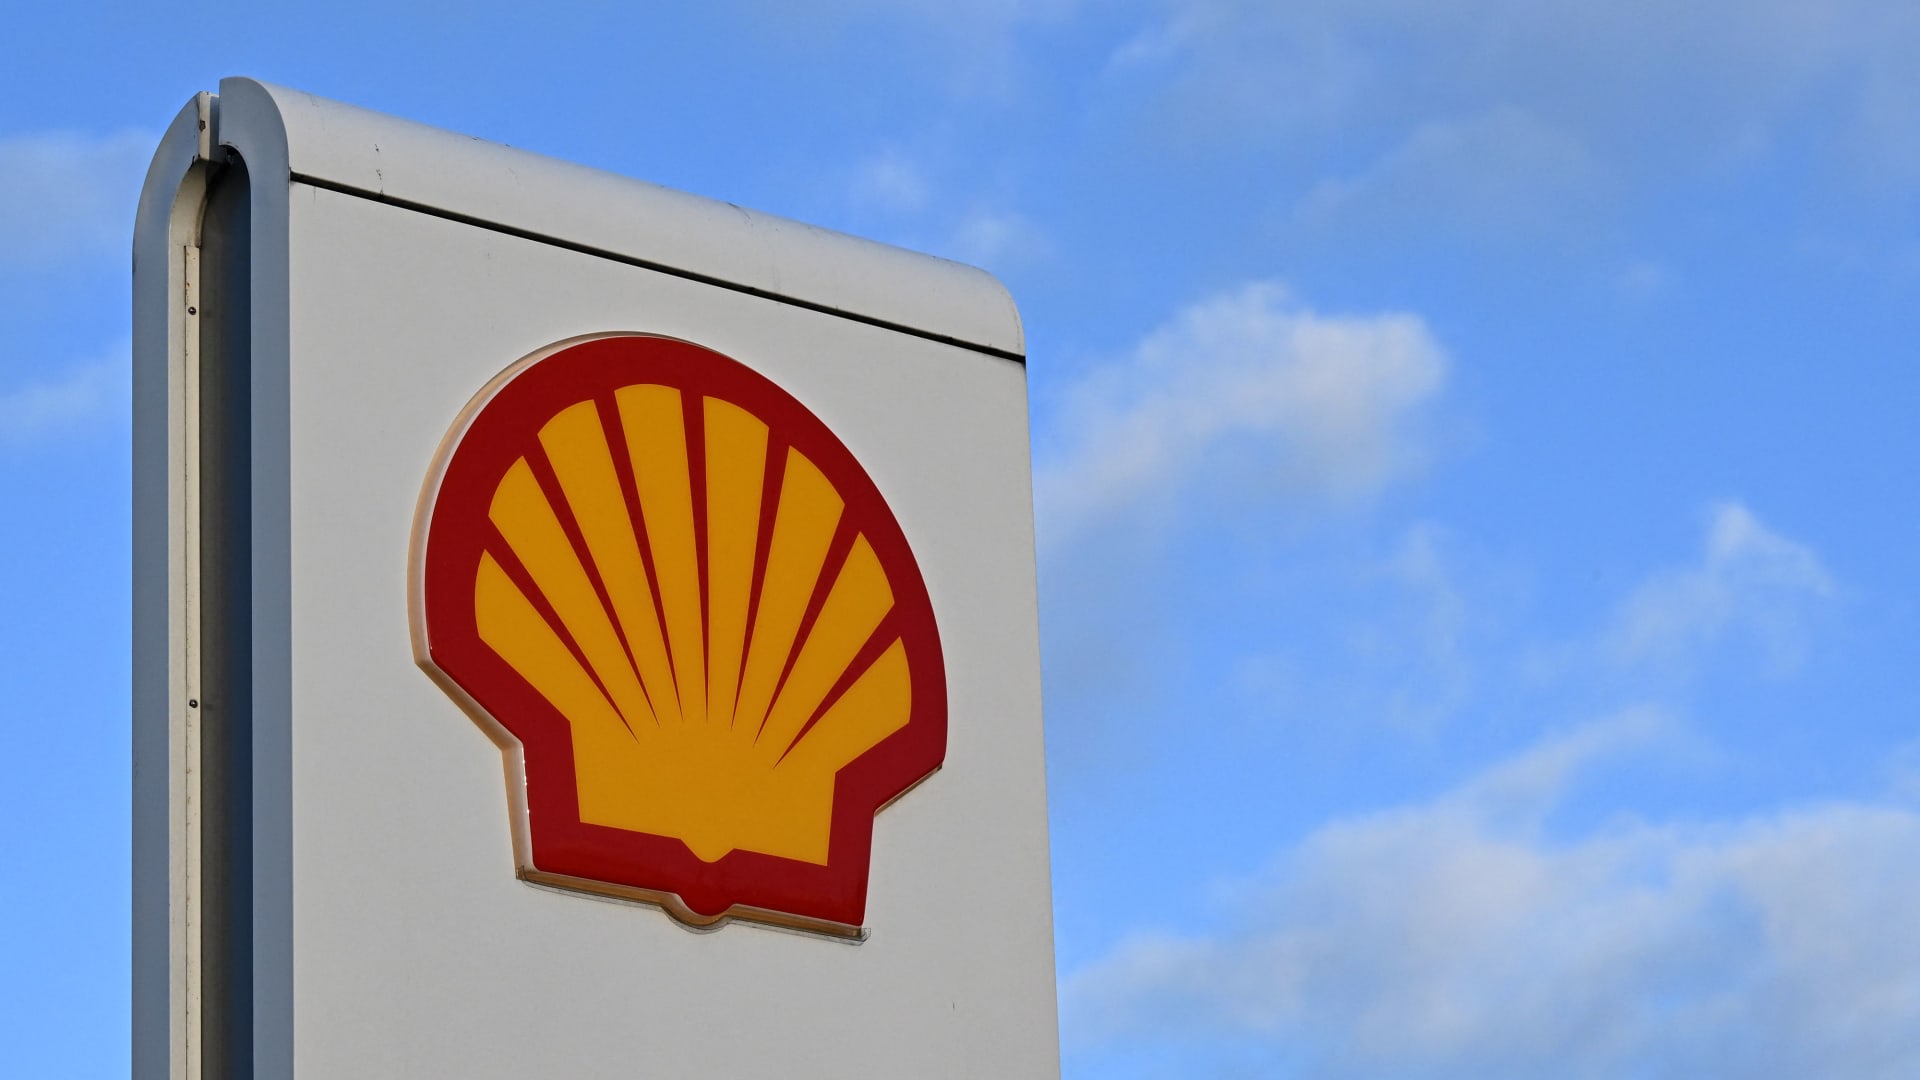 Oil giant Shell posts highest-ever annual profit of $40 billion